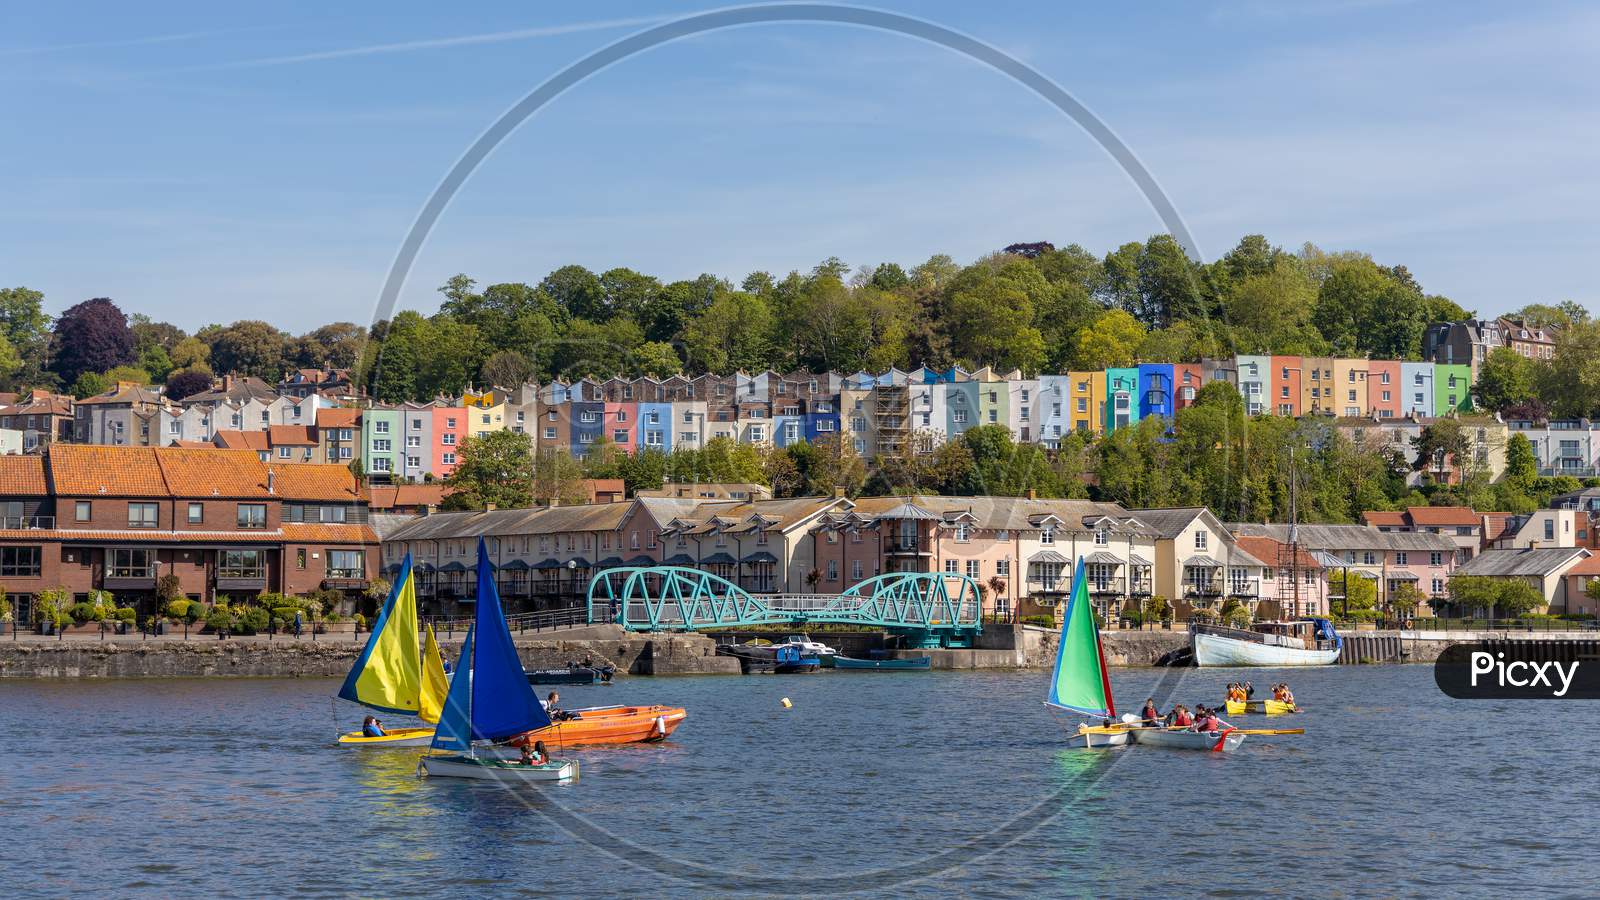 Bristol, Uk - May 14 : View Of Boats On The River Avon In Bristol On May 14, 2019. Unidentified People